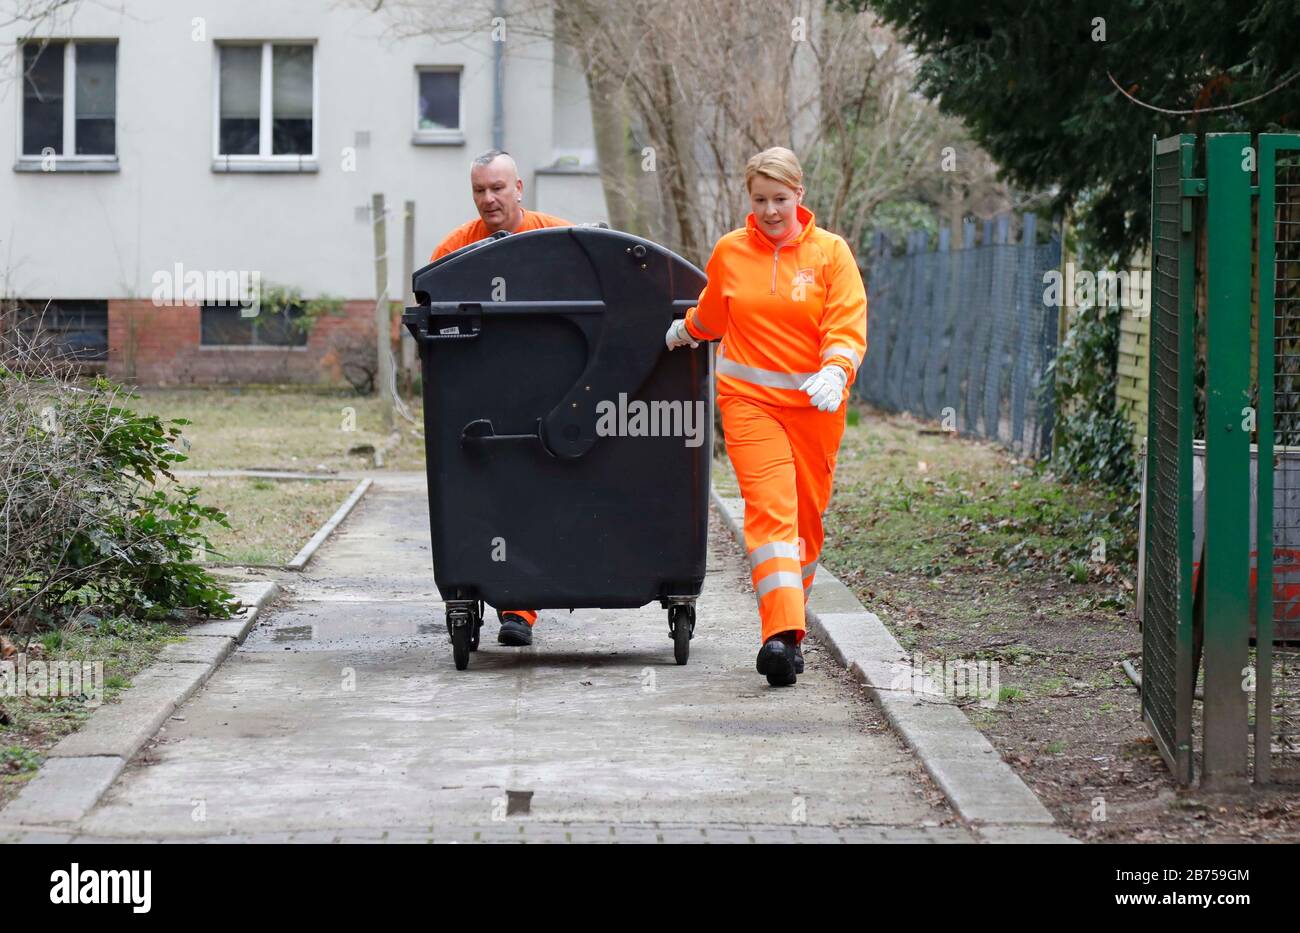 Federal Minister for Family Affairs Franziska Giffey as garbage collector at the waste disposal tour of the BSR, Berlin's city cleaning service, on 07.03.2019. Giffey informed herself about women in previously male-dominated professions in the municipal economy. [automated translation] Stock Photo